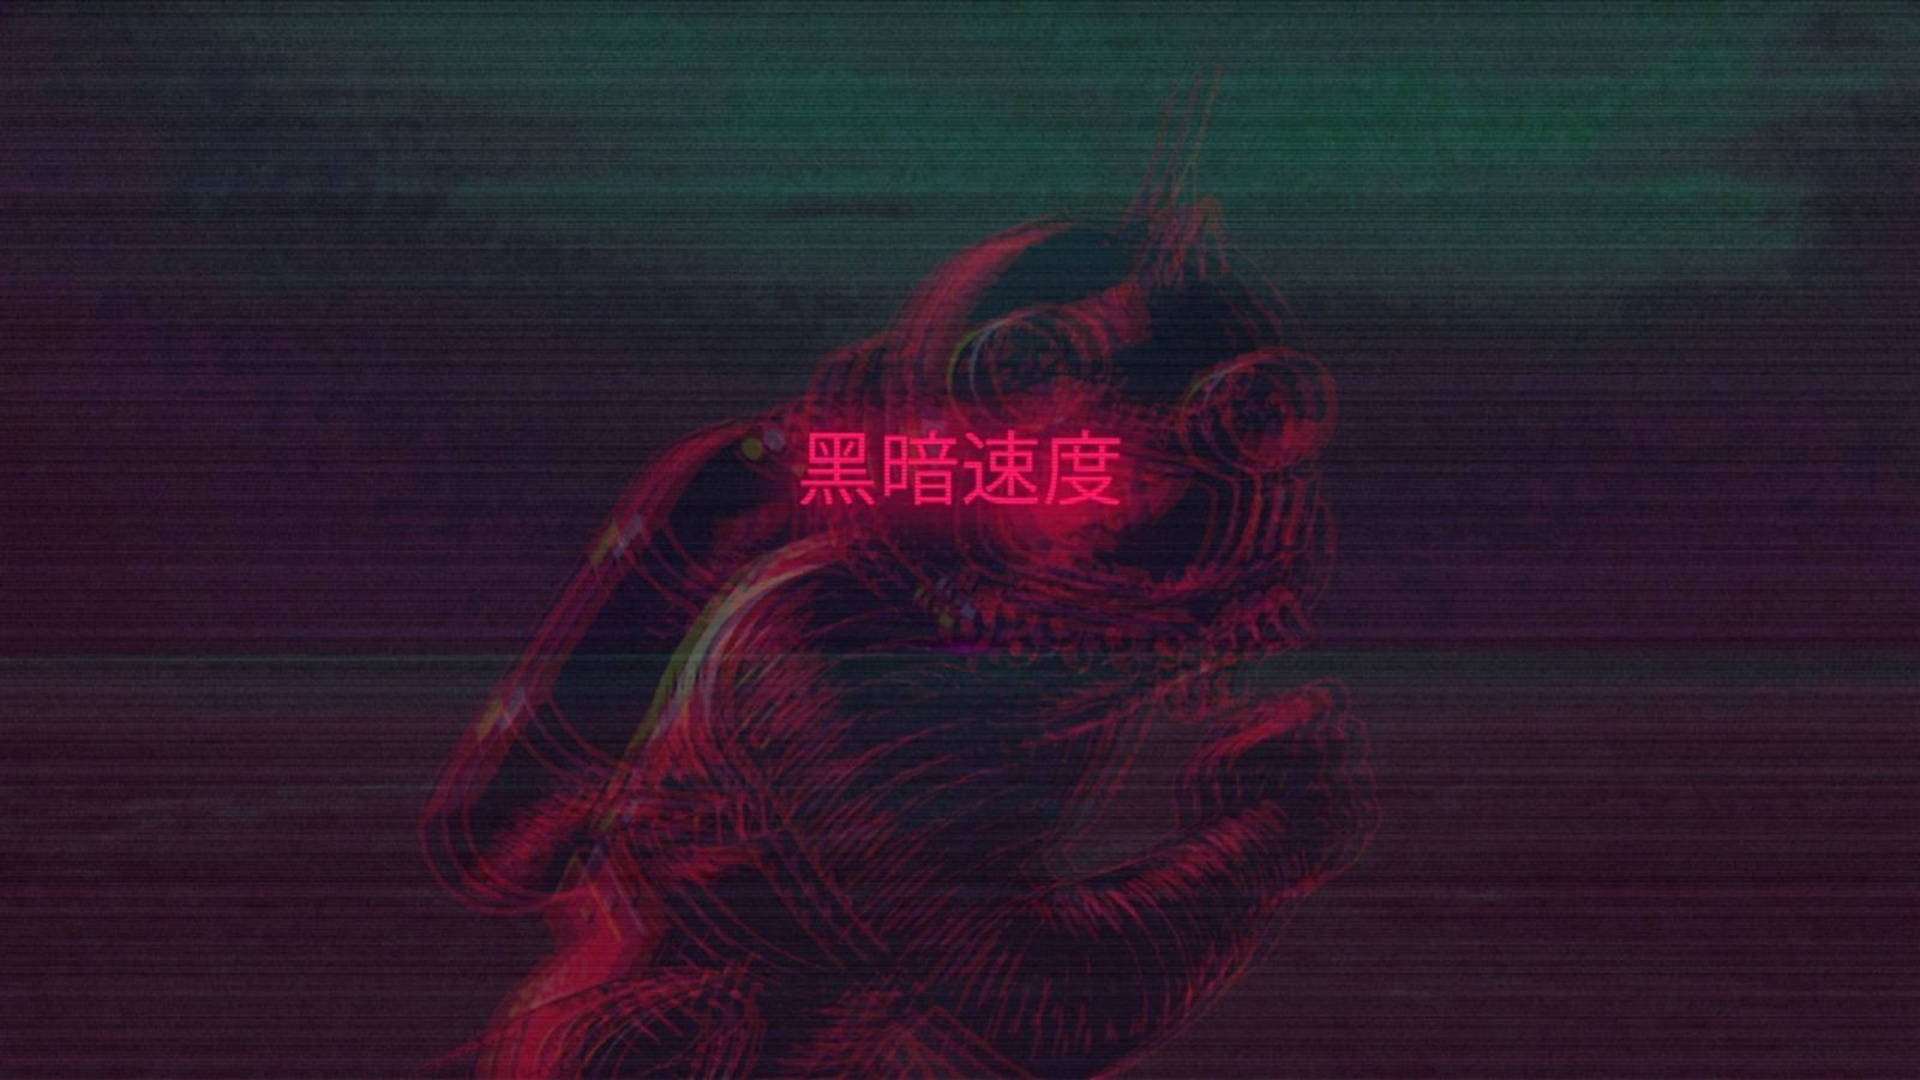 Trippy Dark Astronaut With Chinese Characters Background